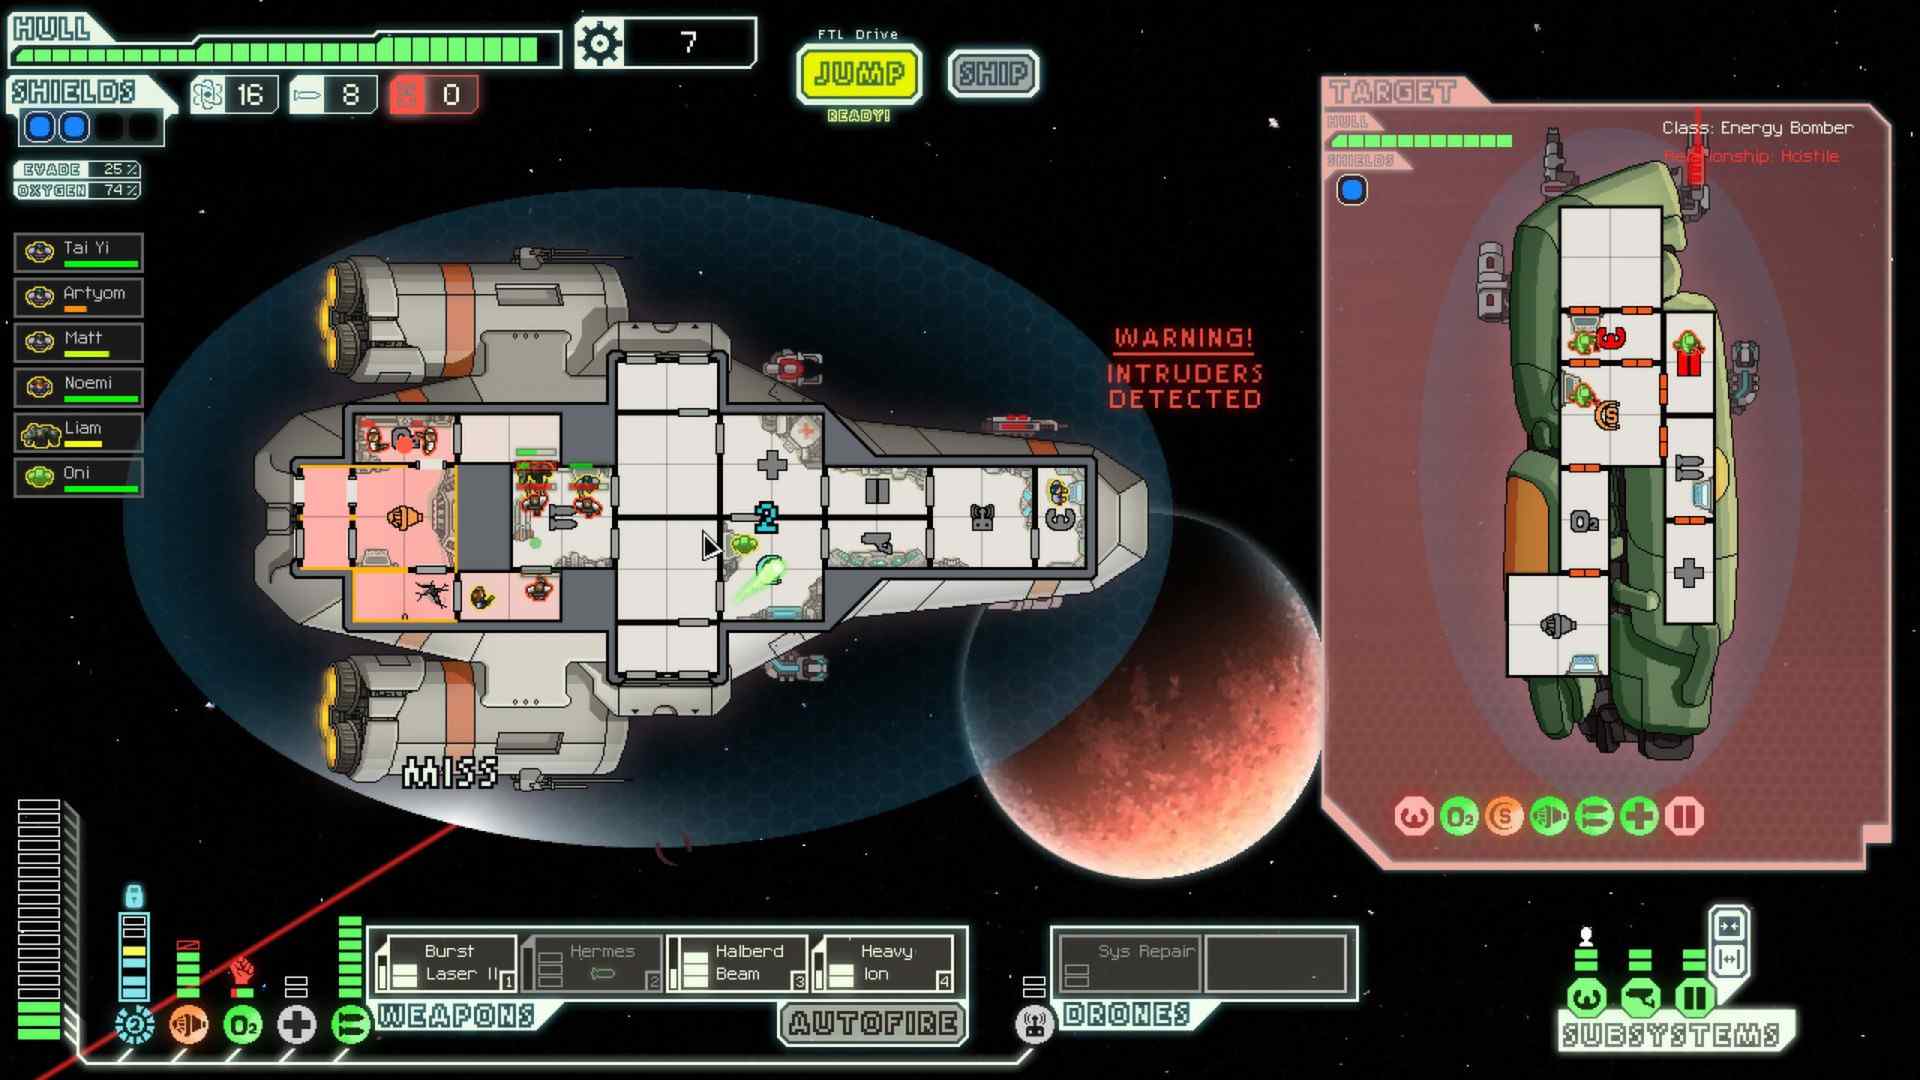 FTL: Faster Than Light": A gripping space odyssey unfolds as players navigate perilous encounters, making heart-wrenching decisions that shape the fate of their crew and ship.